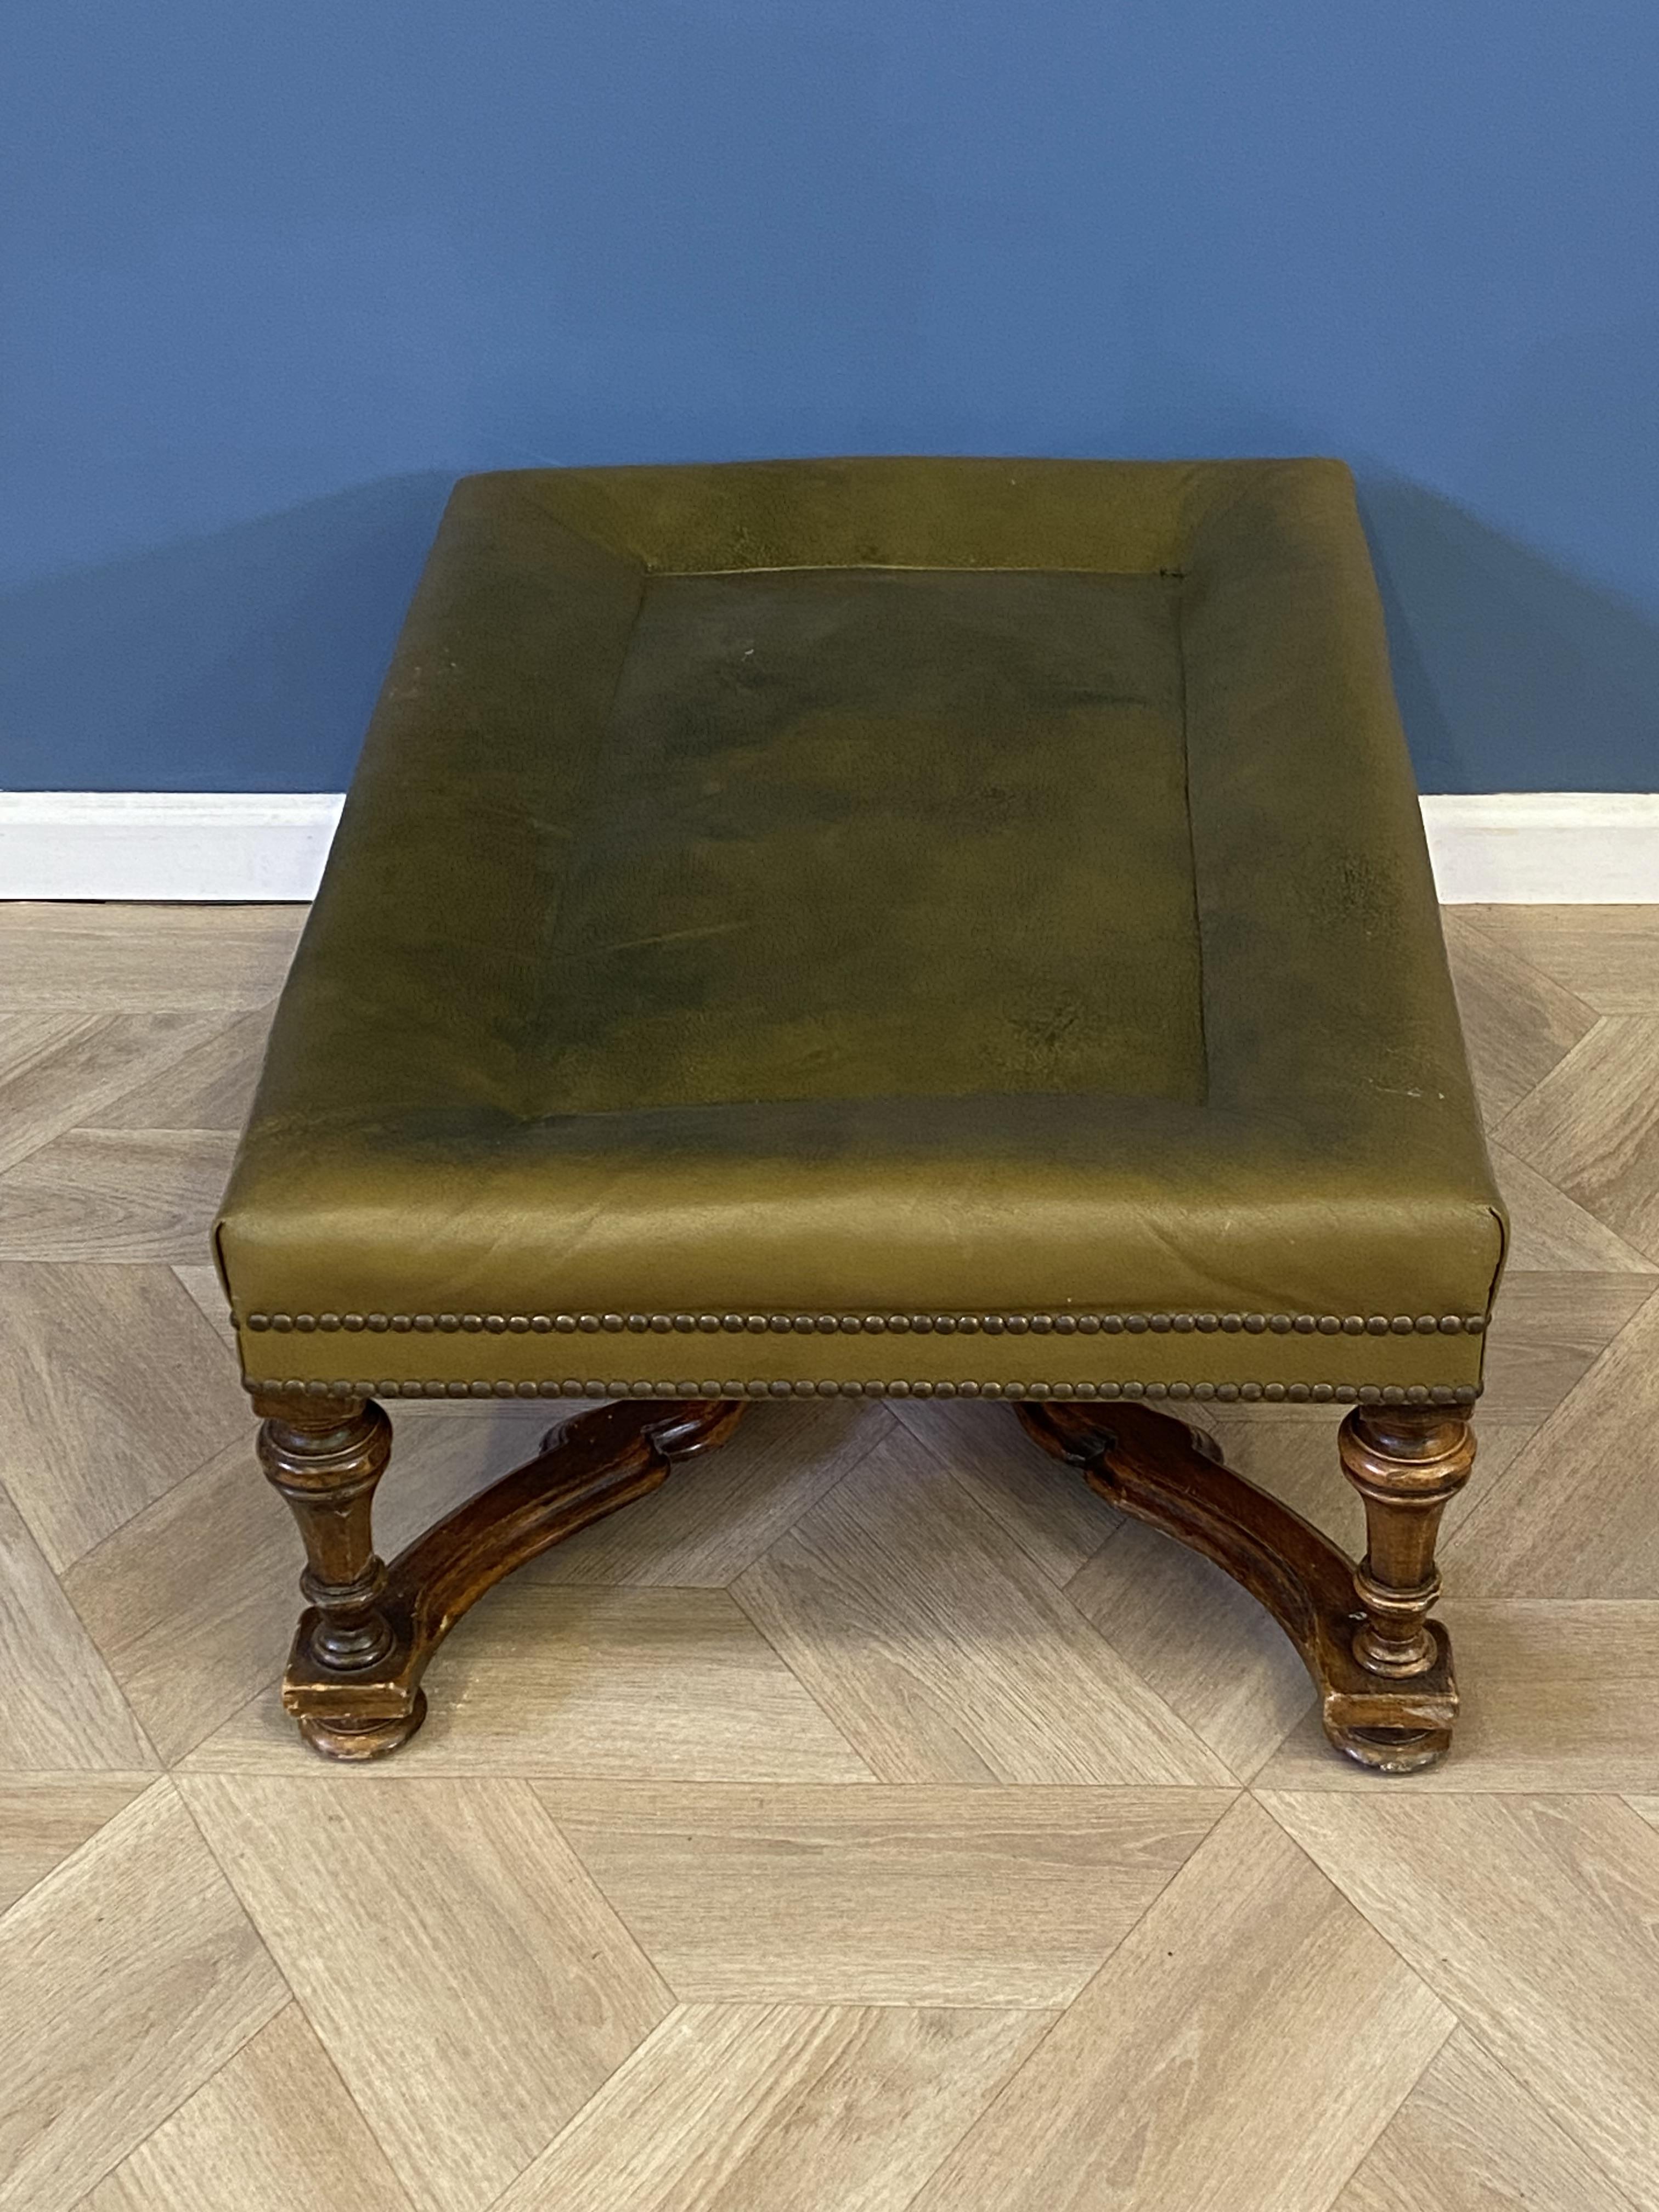 Green leather footstool - Image 5 of 8